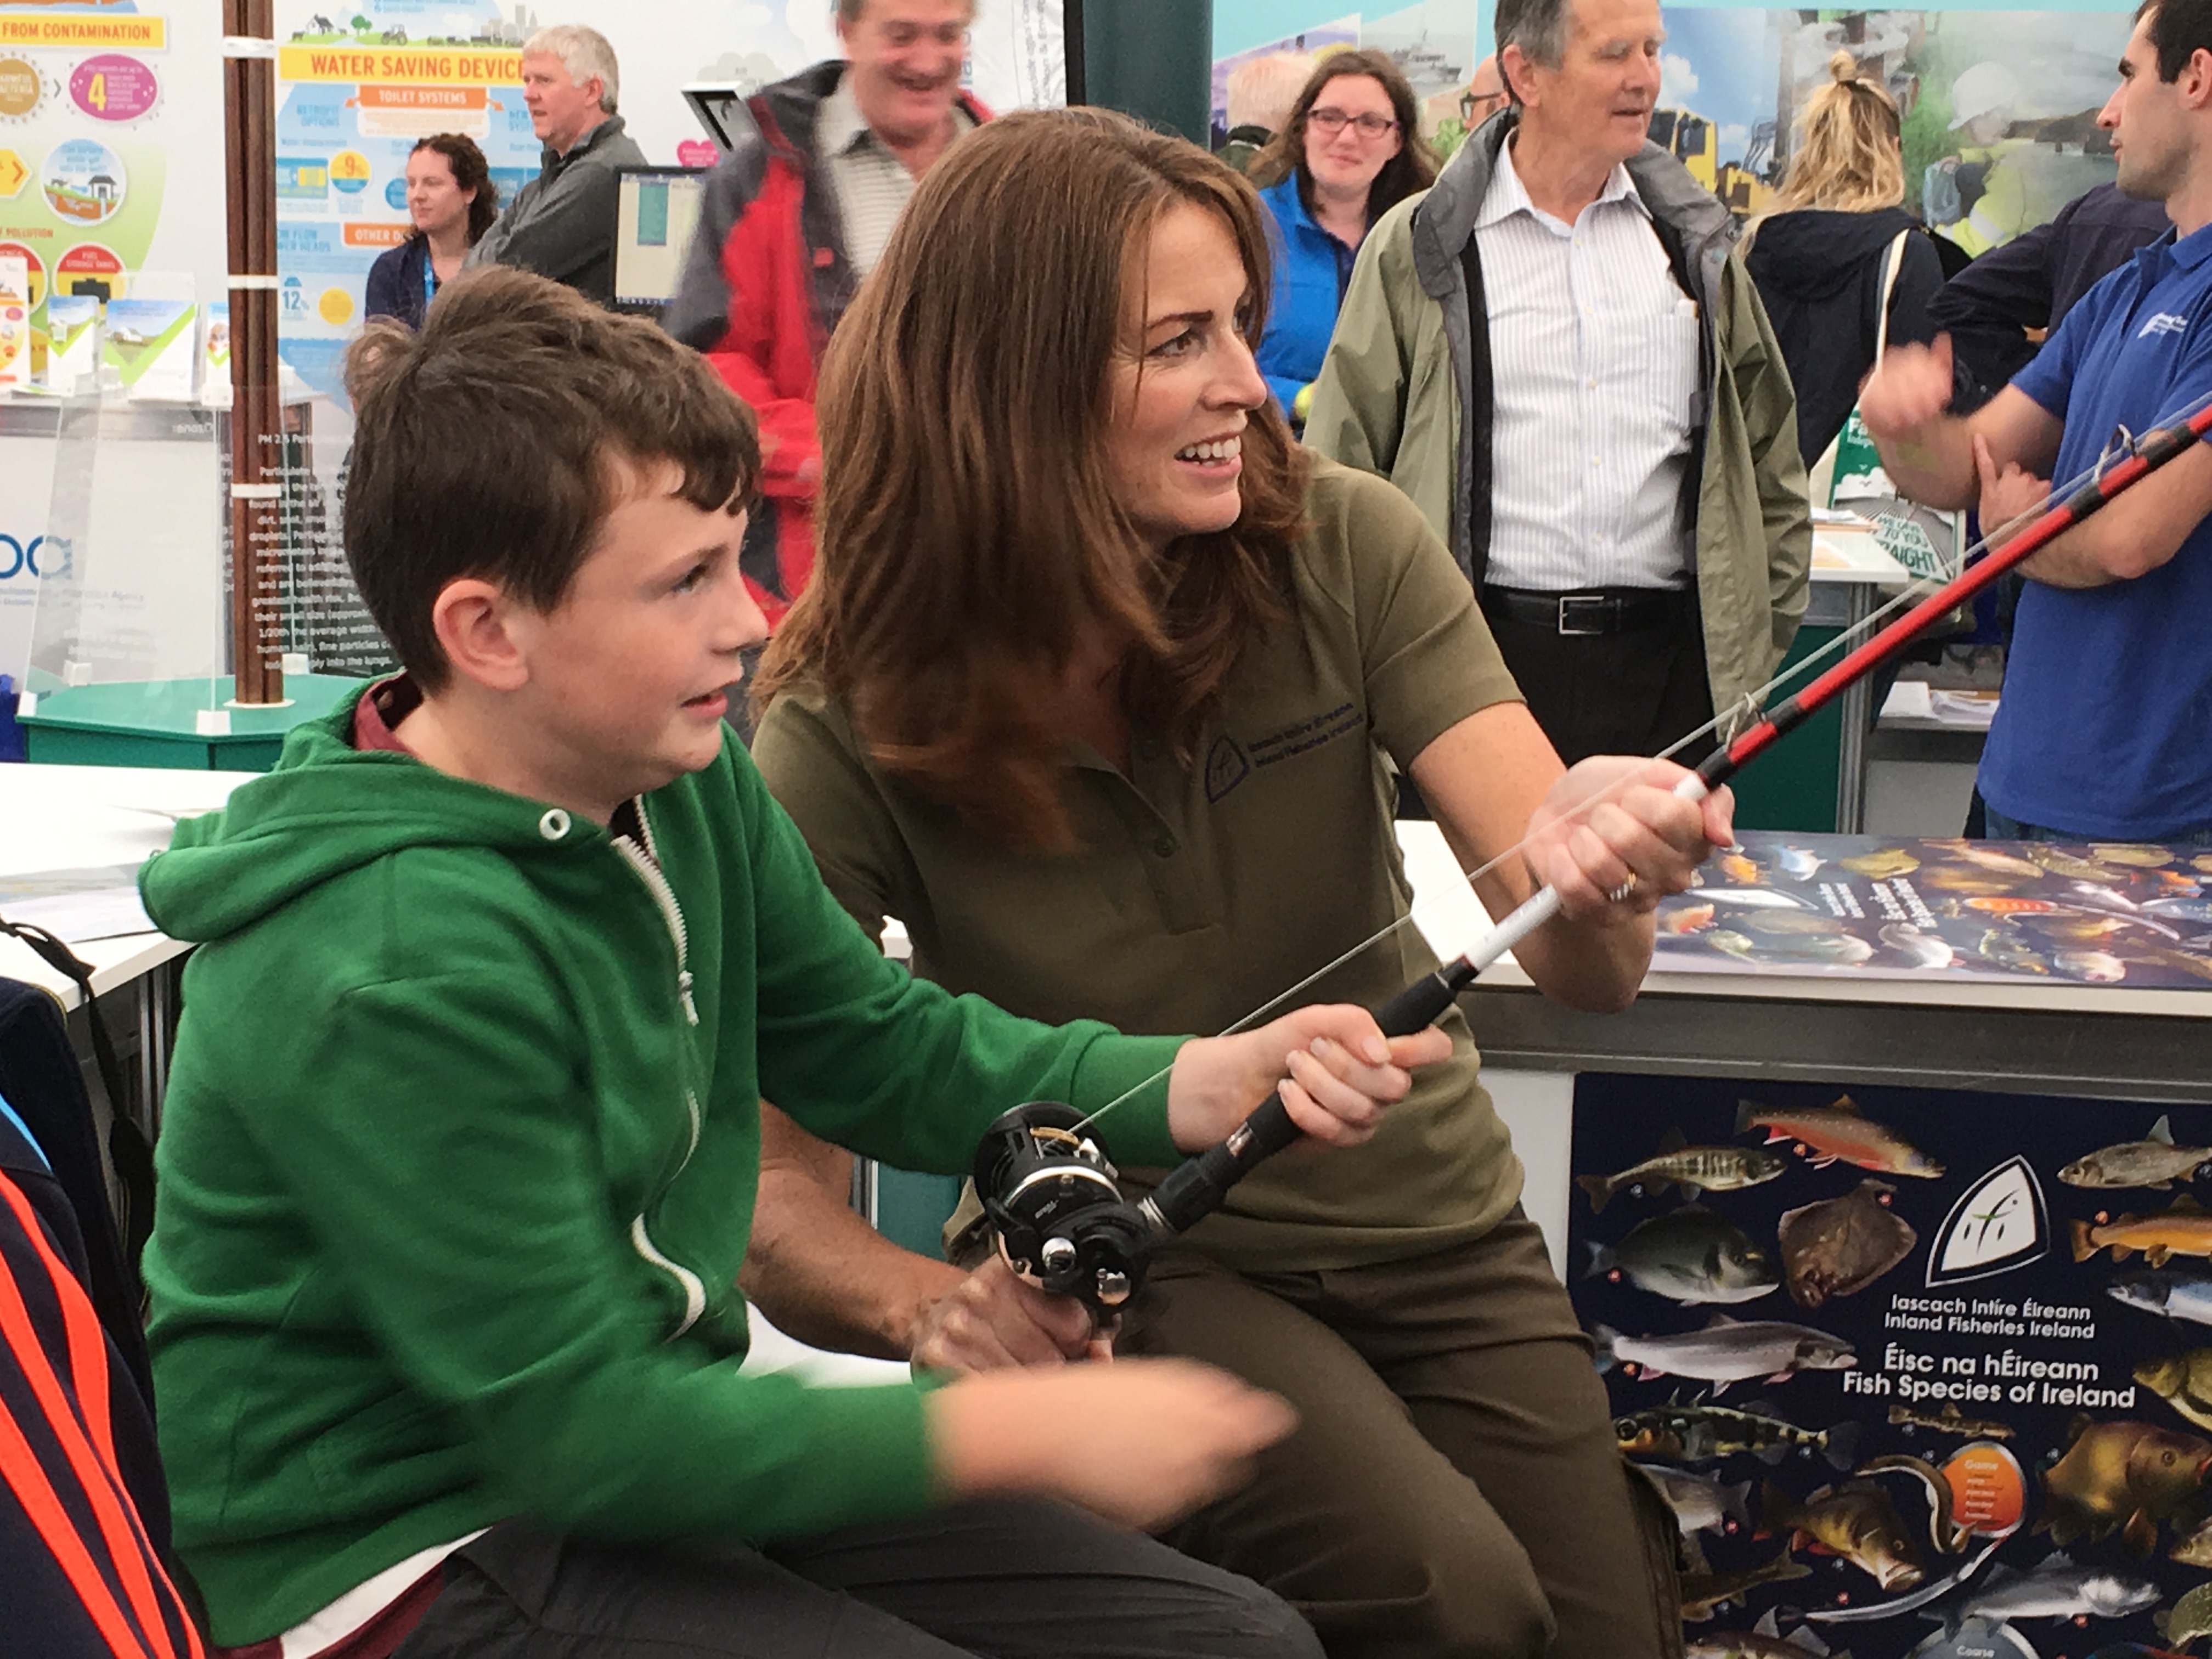 Catch your first fish and learn about Ireland’s freshwater fish species at the National Ploughing Championships 2019